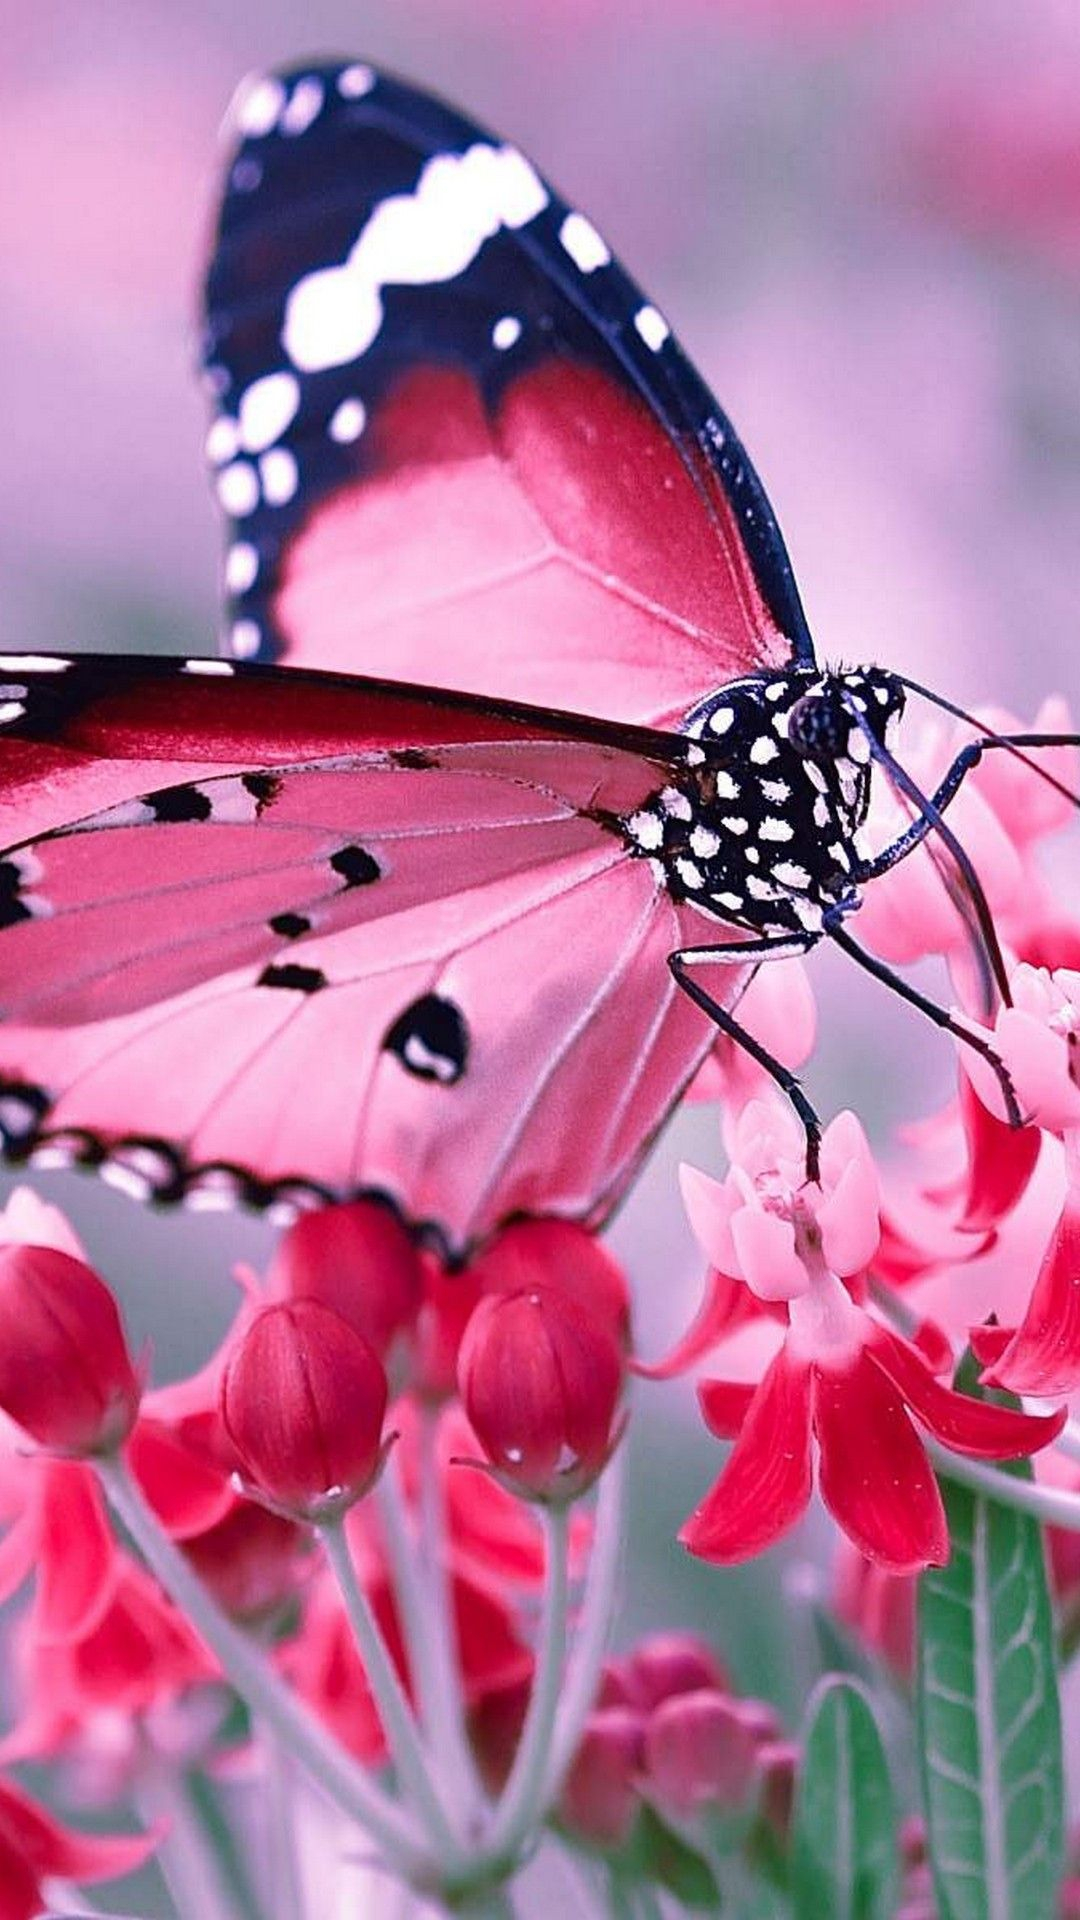 1080x1920 Pink Butterfly Wallpaper For Phone | Pink wallpaper backgrounds, Butterfly wallpaper, Butterfly wallpaper iphone